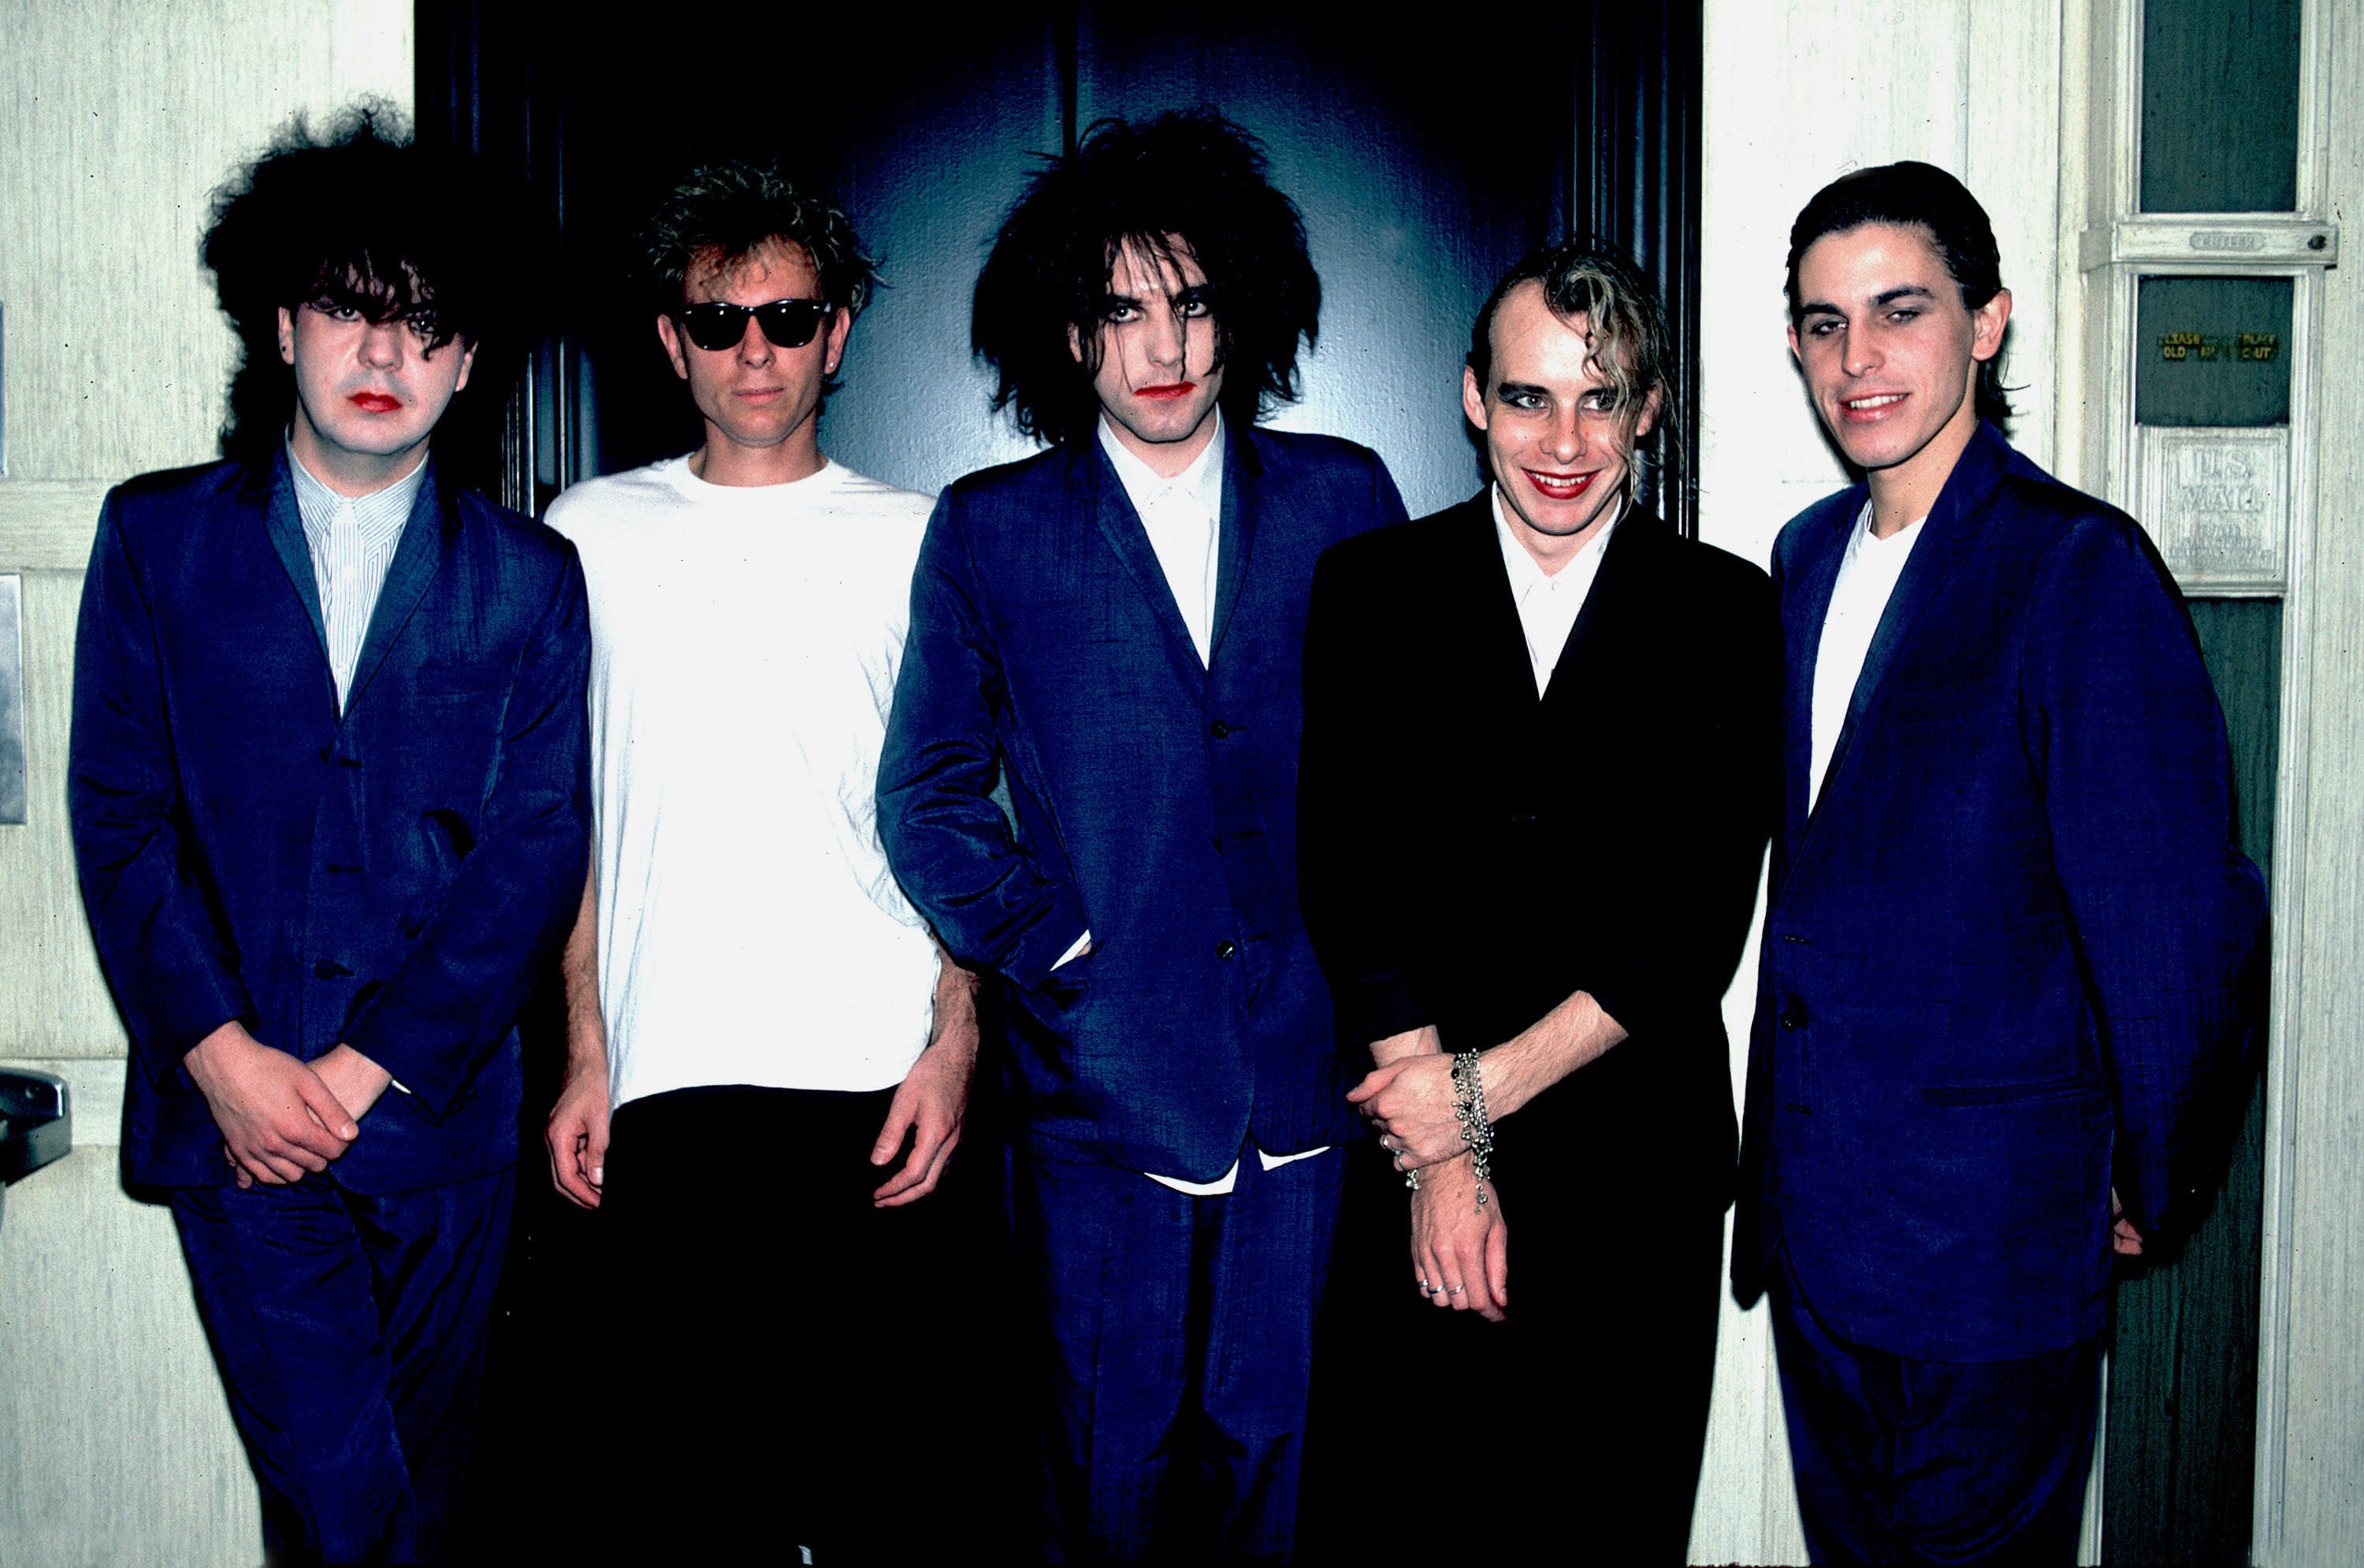 The Cure at 40 band looks back at many lineup changes [Video]